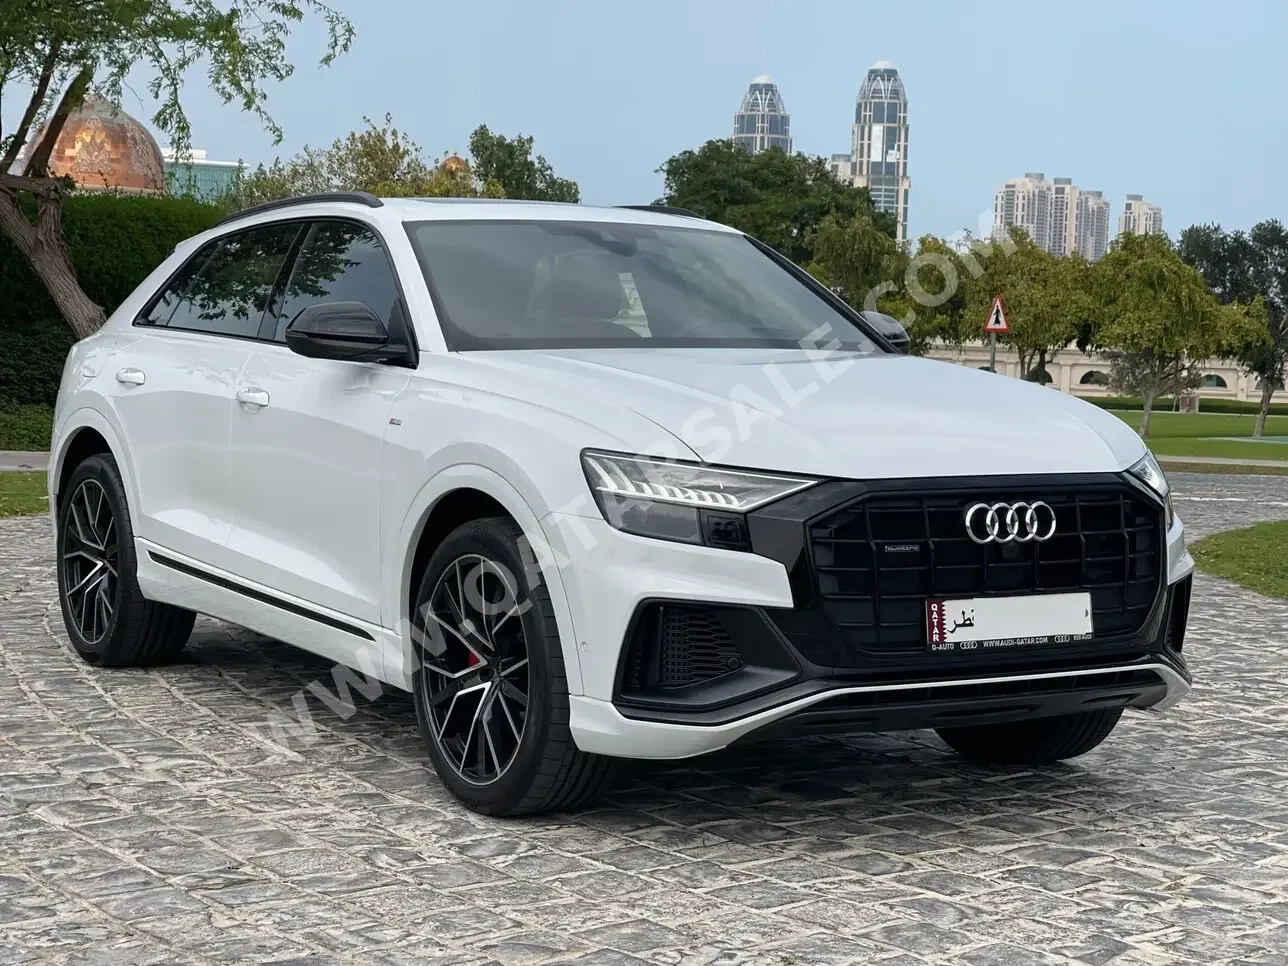  Audi  Q8  S-Line  2023  Automatic  1,200 Km  6 Cylinder  All Wheel Drive (AWD)  SUV  White  With Warranty